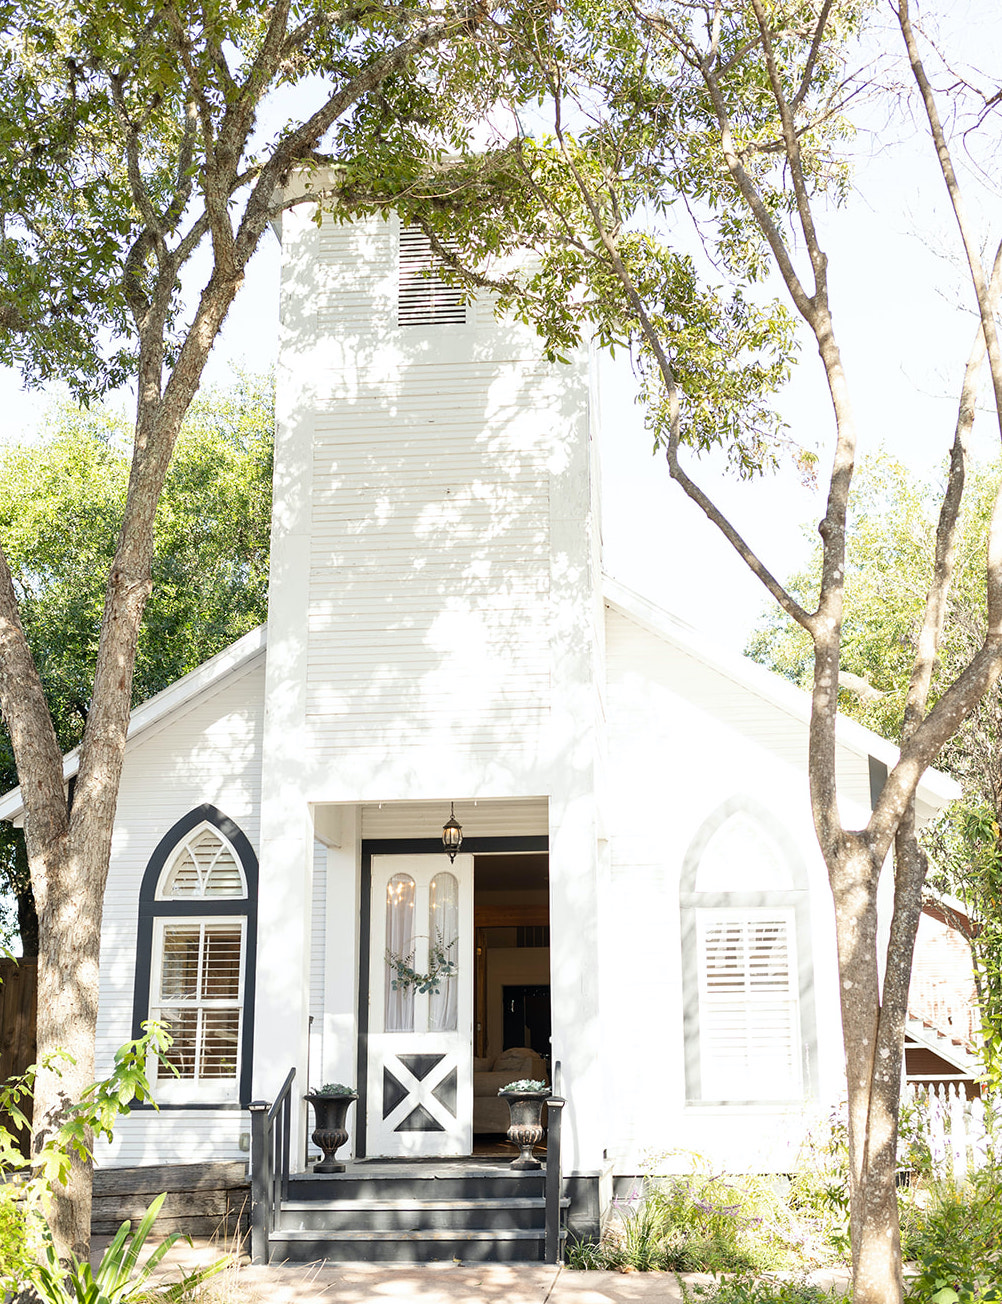 A view of the outside of a white wedding chapel that is a part of The Kendall Hill Country Inn.